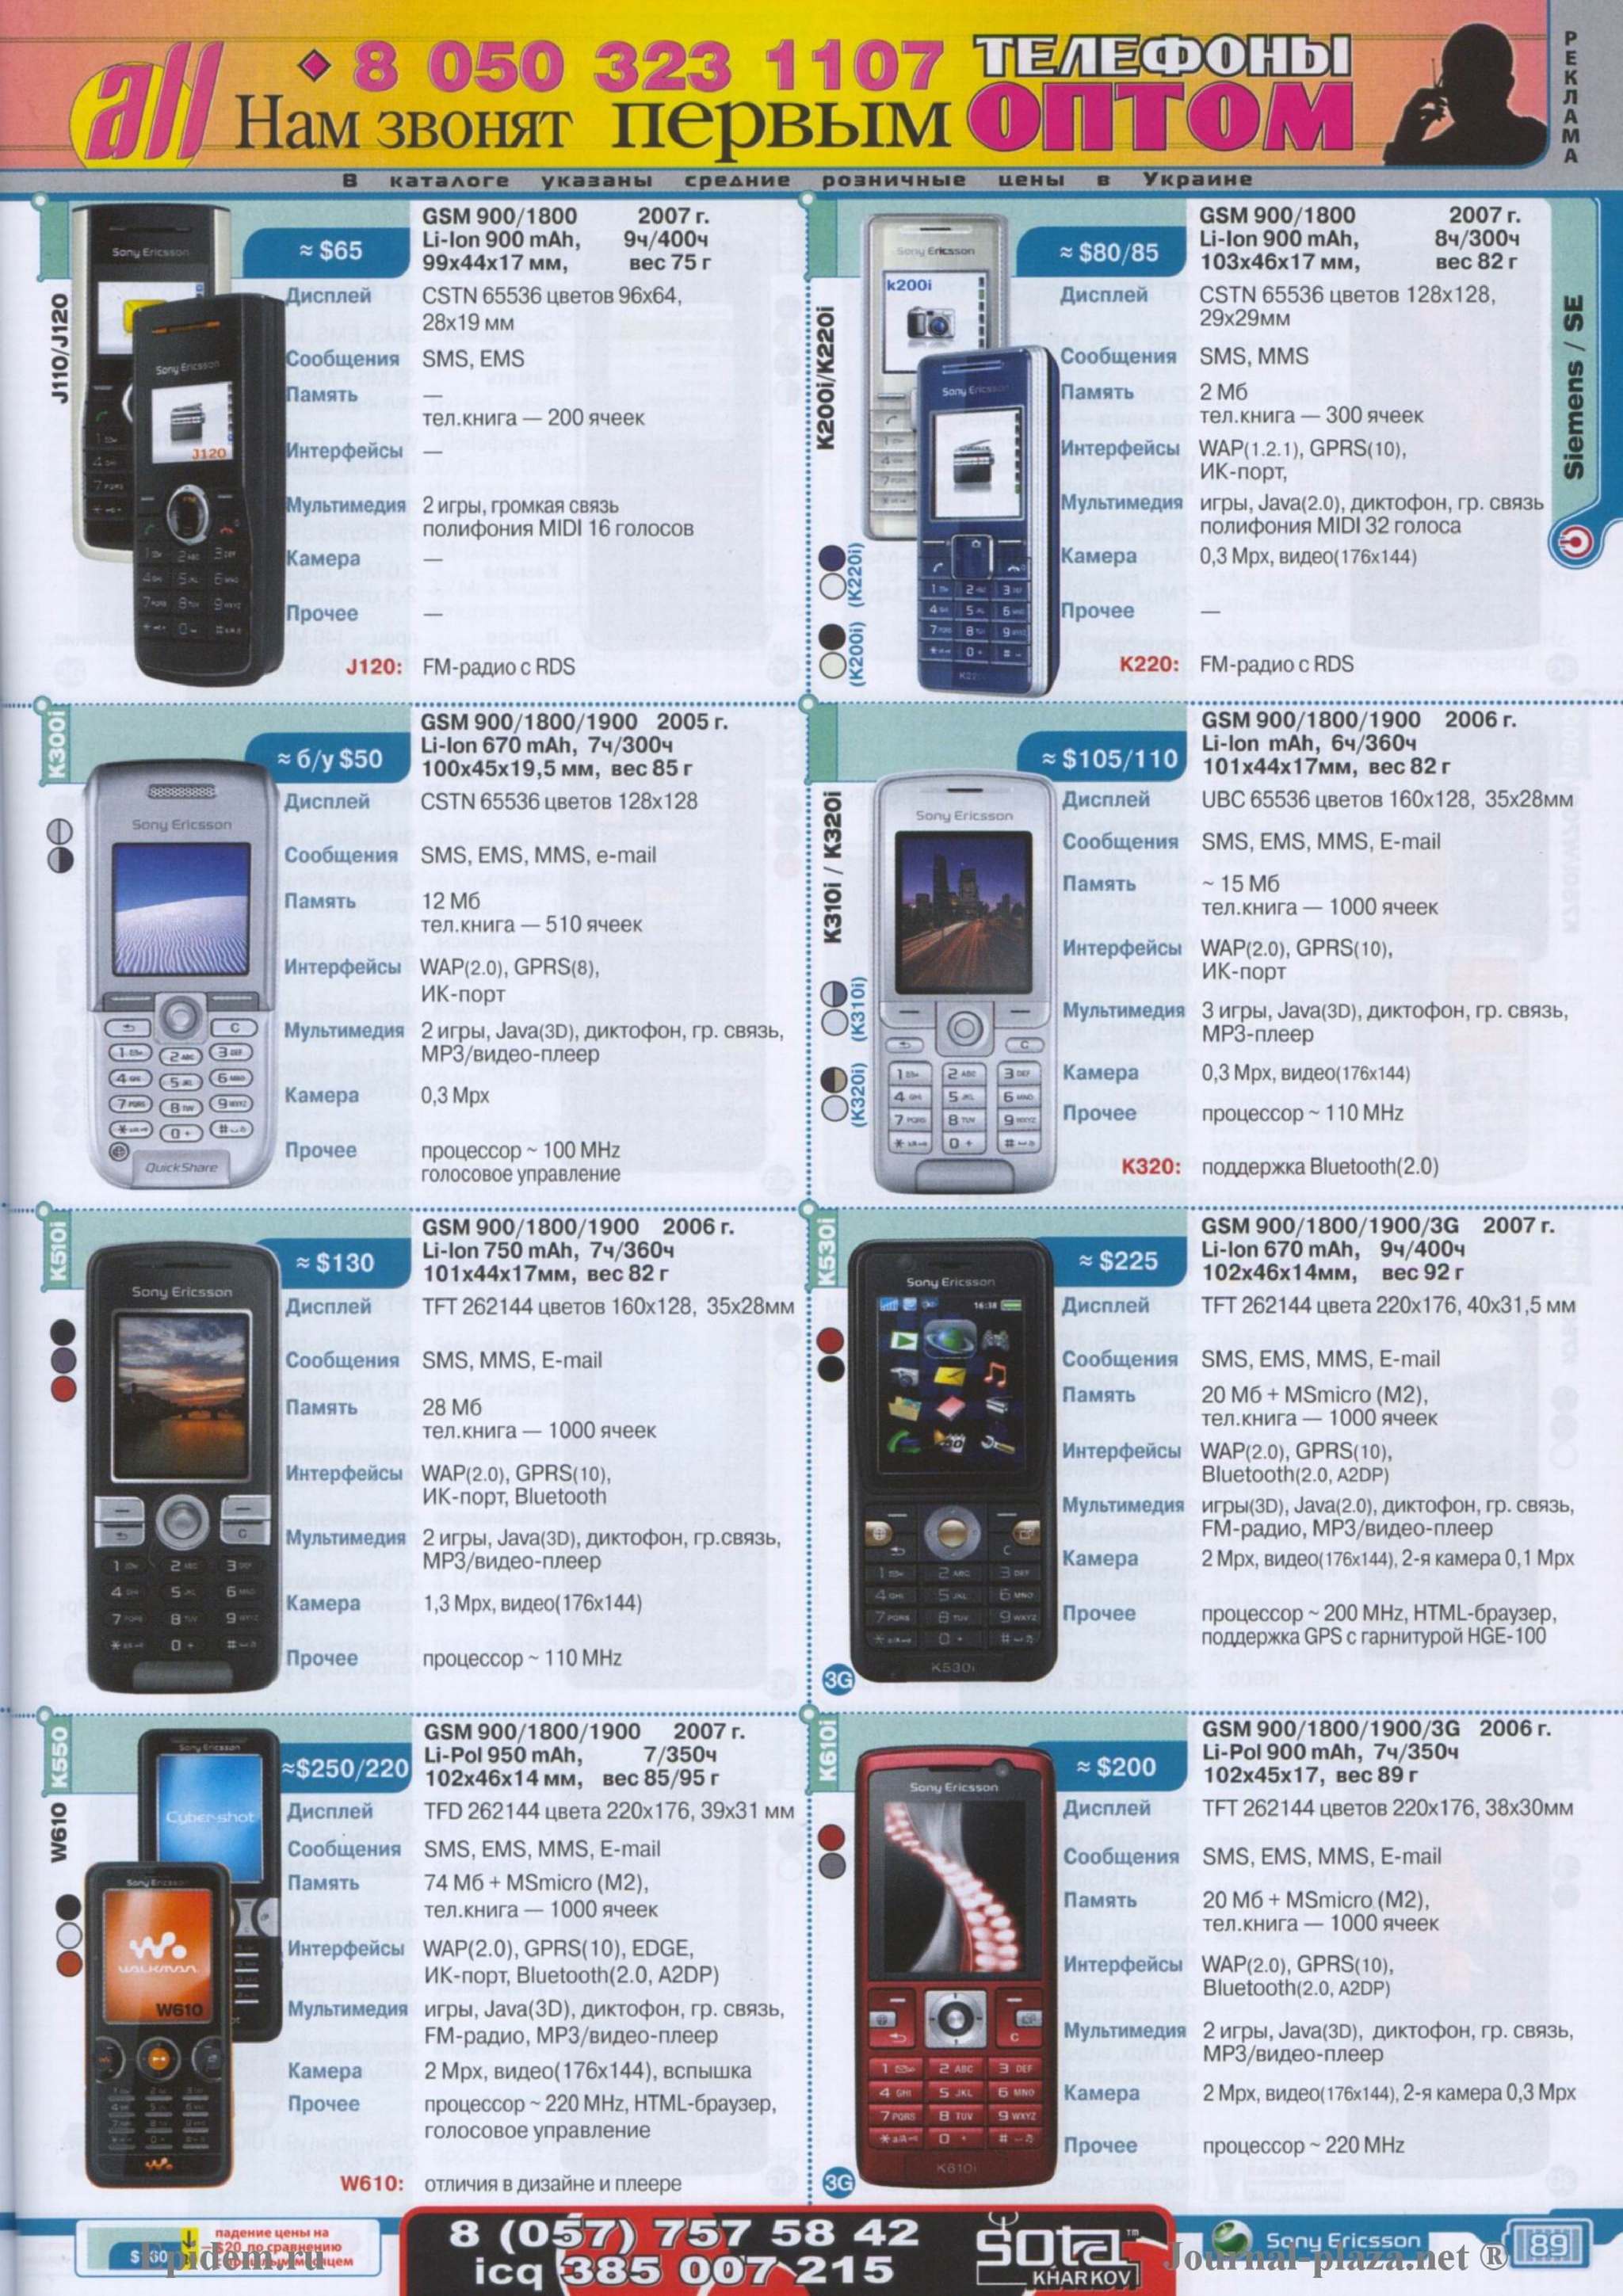 The latest issue of MobiLux magazine - My, Telephone, Nostalgia, 2000s, A wave of posts, Riot, Bring back my 2007, New items, Magazine, Longpost, Wave of Boyans